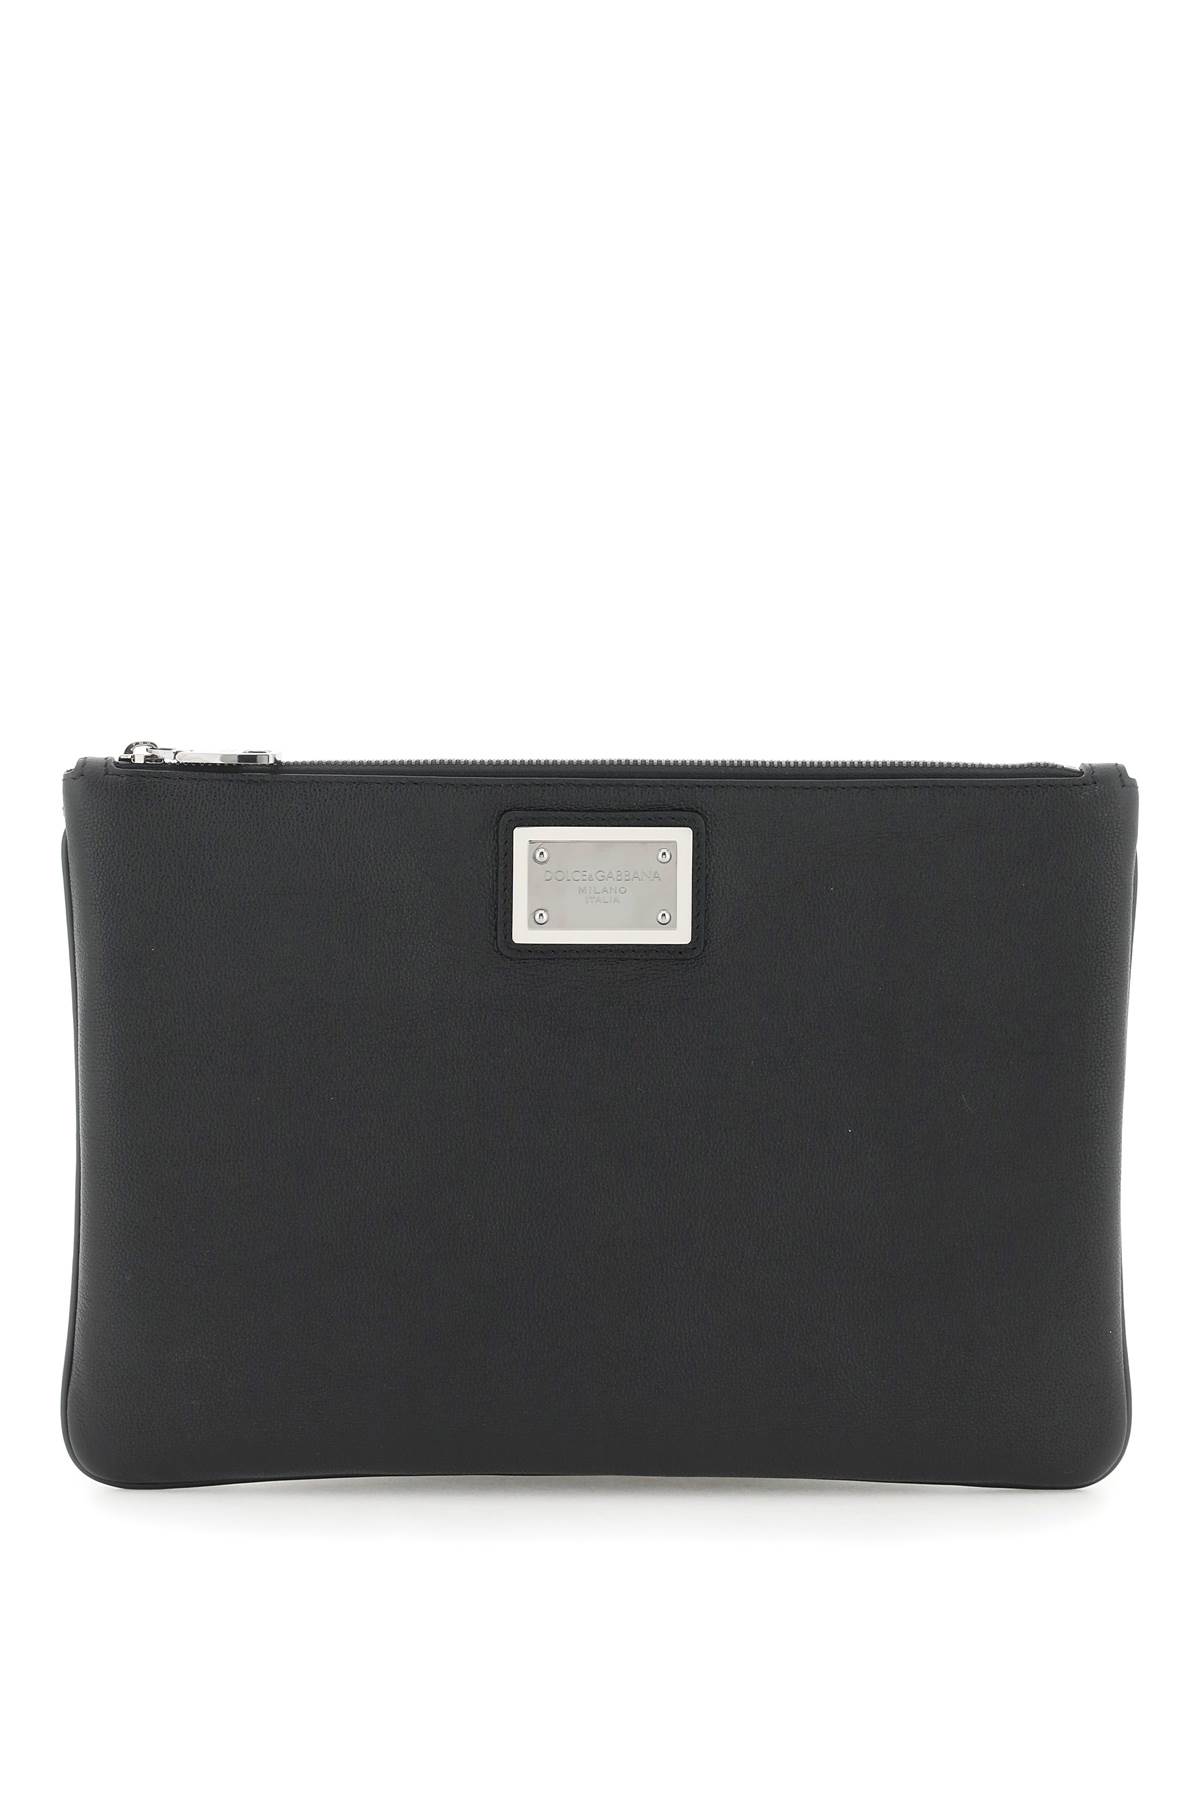 Dolce & Gabbana Leather &amp; Nylon Pouch In Black